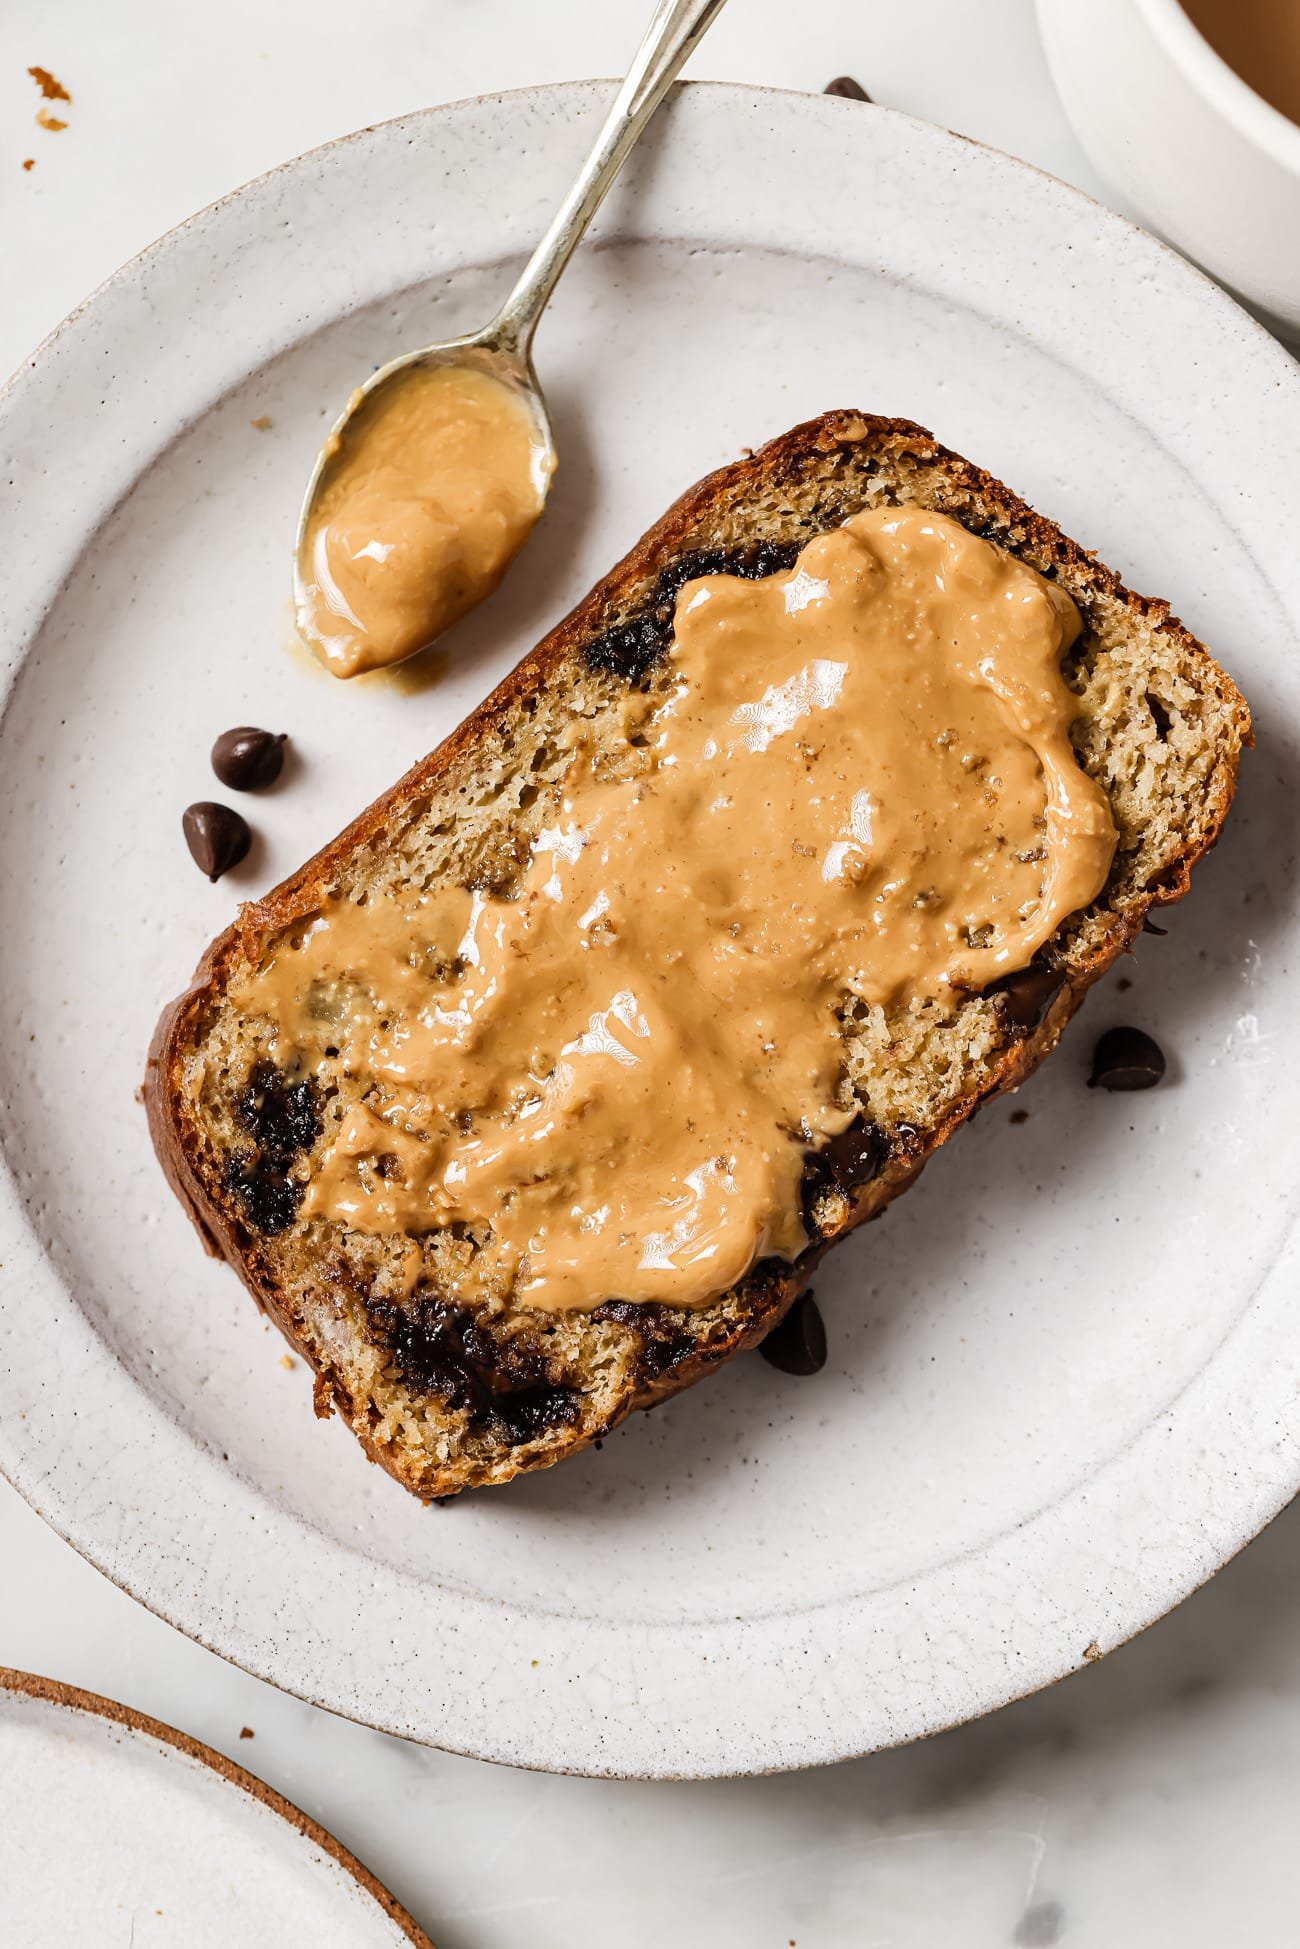 High protein banana bread with peanut butter spread on top.